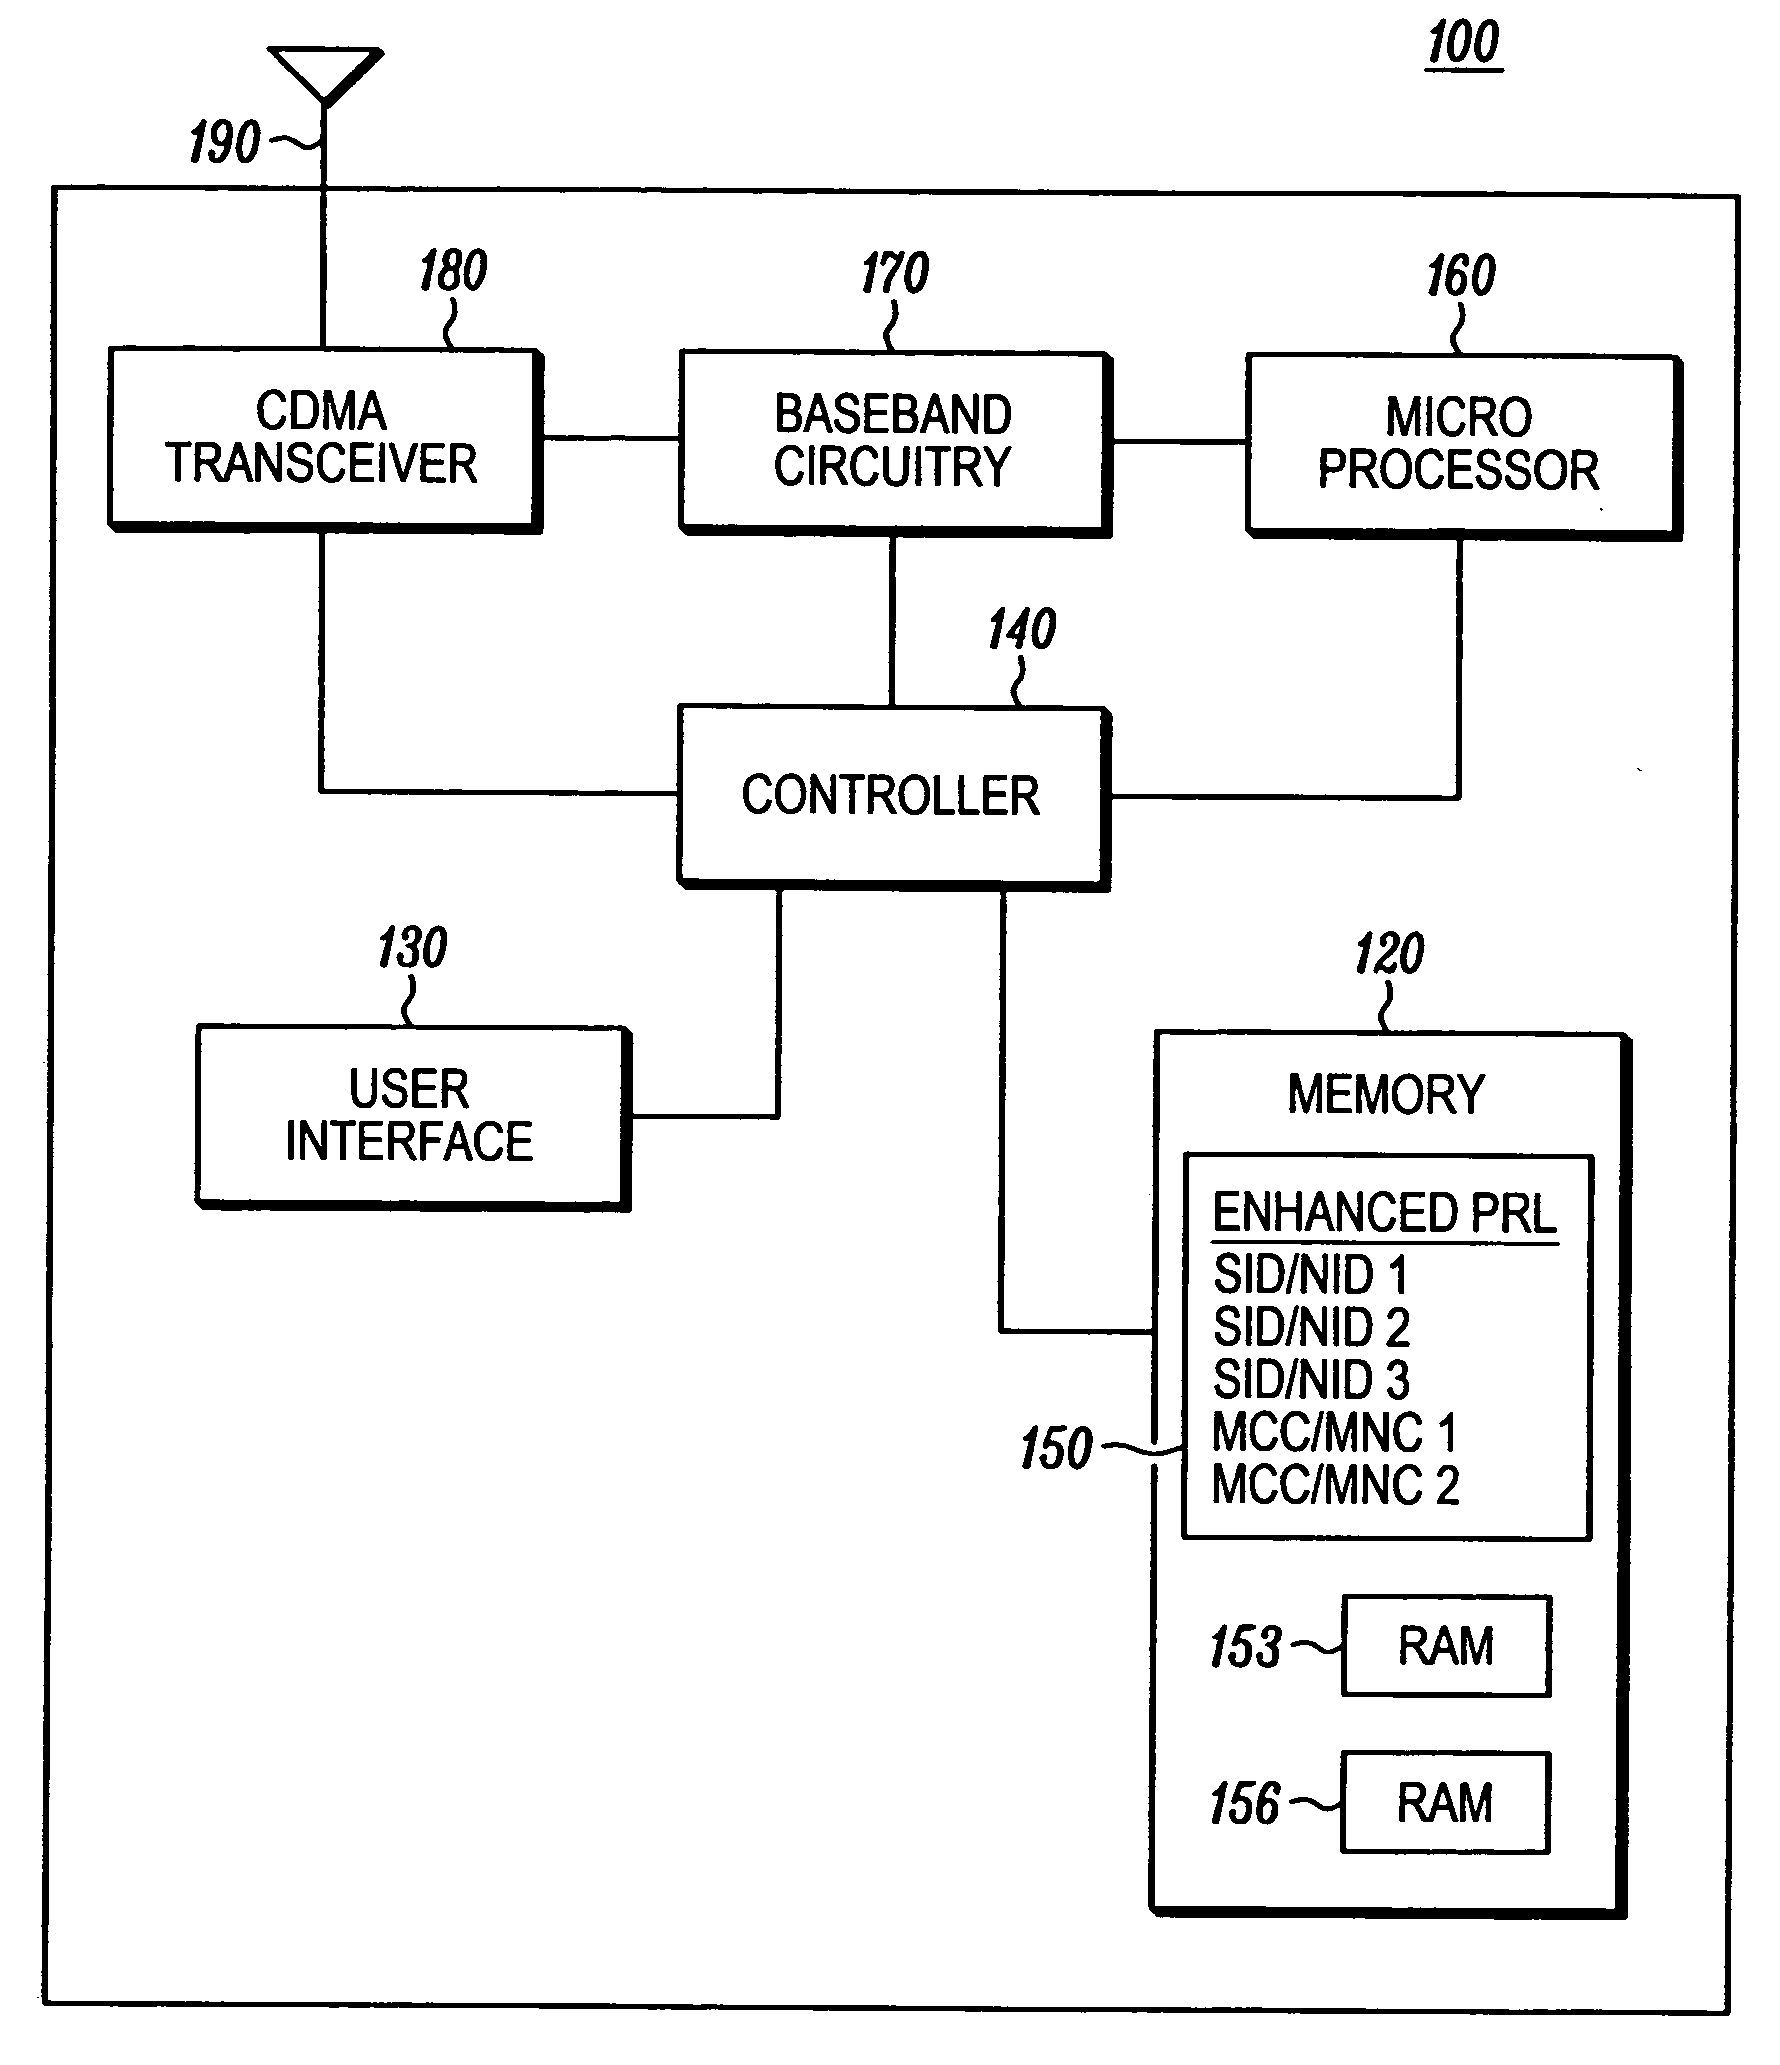 Using an enhanced preferred roaming list in a terminal device